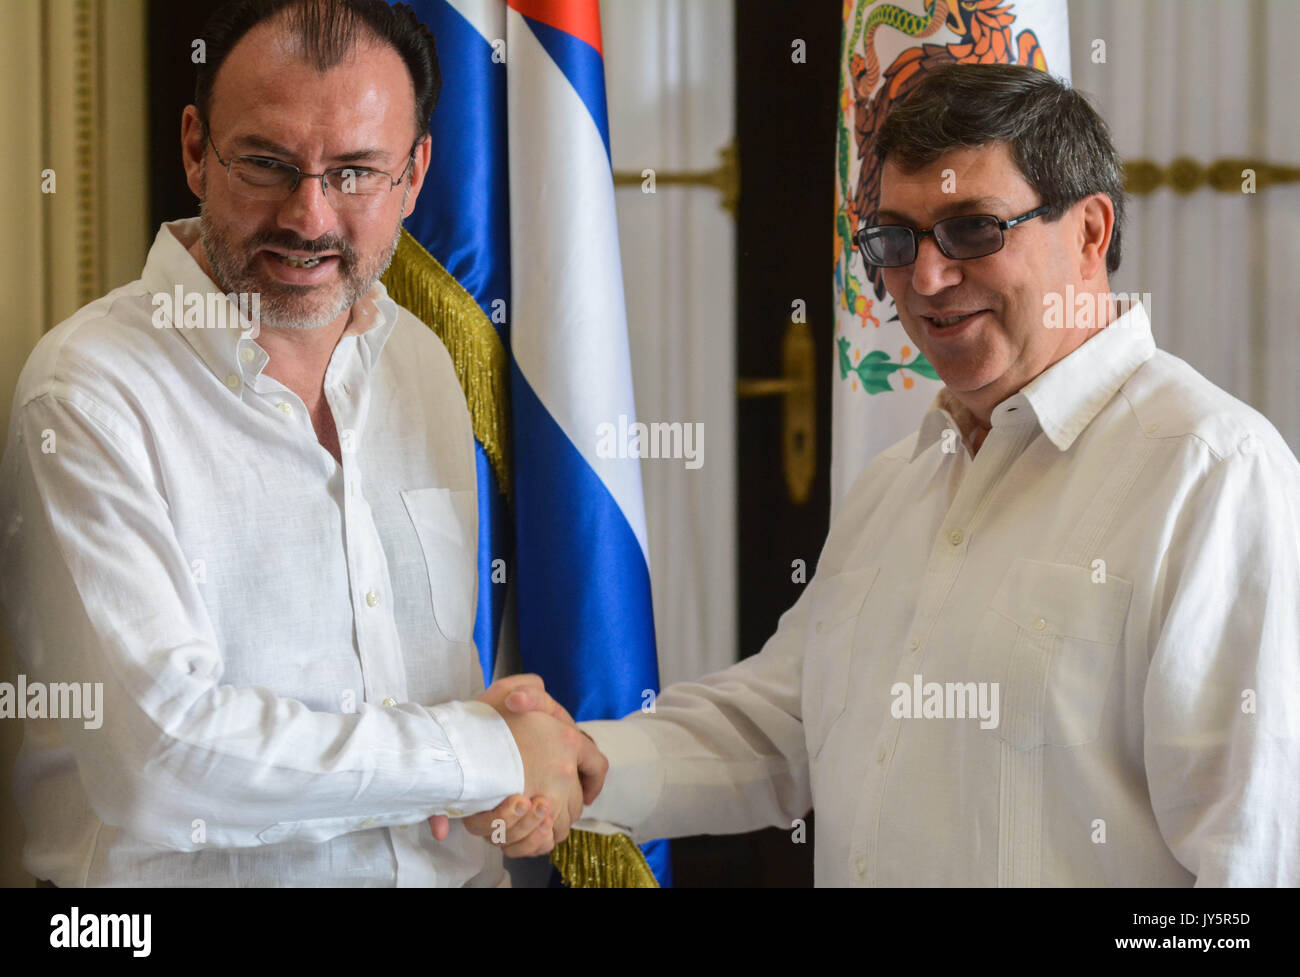 Havana, Cuba. 18th Aug, 2017. Cuba's Foreign Minister Bruno Rodriguez(R) shakes hands with his Mexican counterpart Luis Videgaray(L) at the headquarters of the Cuban Foreign Ministry in Havana, Cuba, on Aug. 18, 2017. Credit: Joaquin Hernandez/Xinhua/Alamy Live News Stock Photo